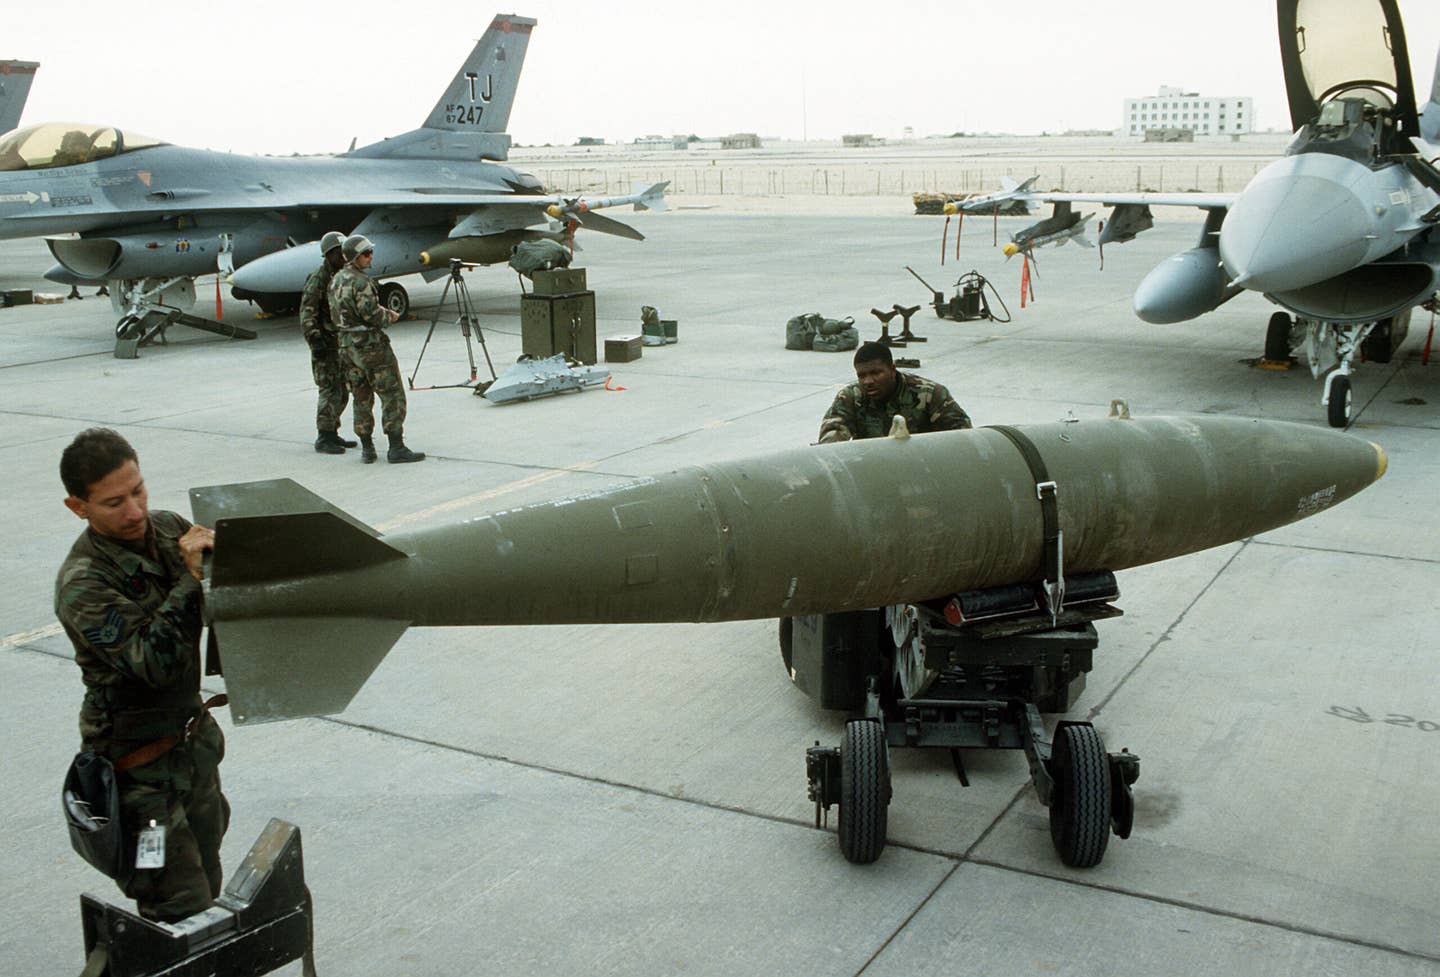 Preparation for loading 2,000-pound Mk 84 bombs onto F-16 aircraft for a daylight strike against Iraqi targets during Operation Desert Storm. The Mk 84 bomb body was used as the basis for the GBU-36/B GAM. <em>U.S. Air Force photo by SSgt. Lee F. Corkran</em>